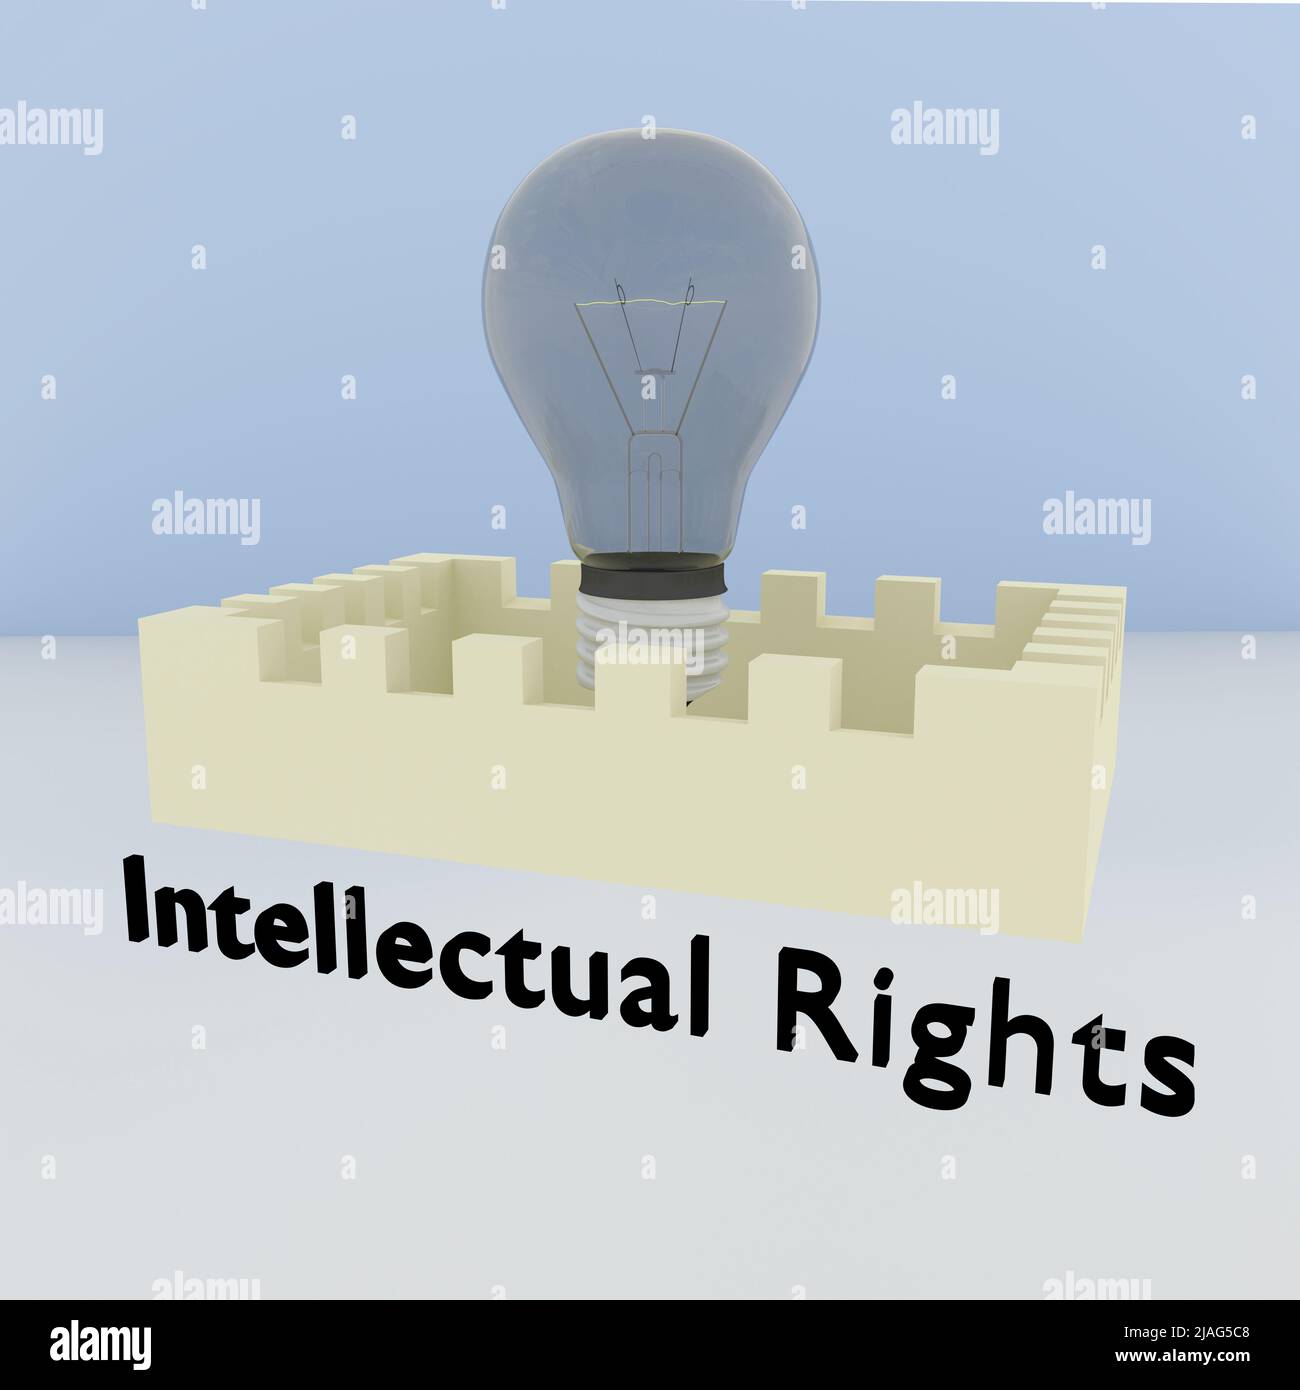 3D illustration of a light bulbs in a symbolic wall, along with the script Intellectual Rights. Stock Photo